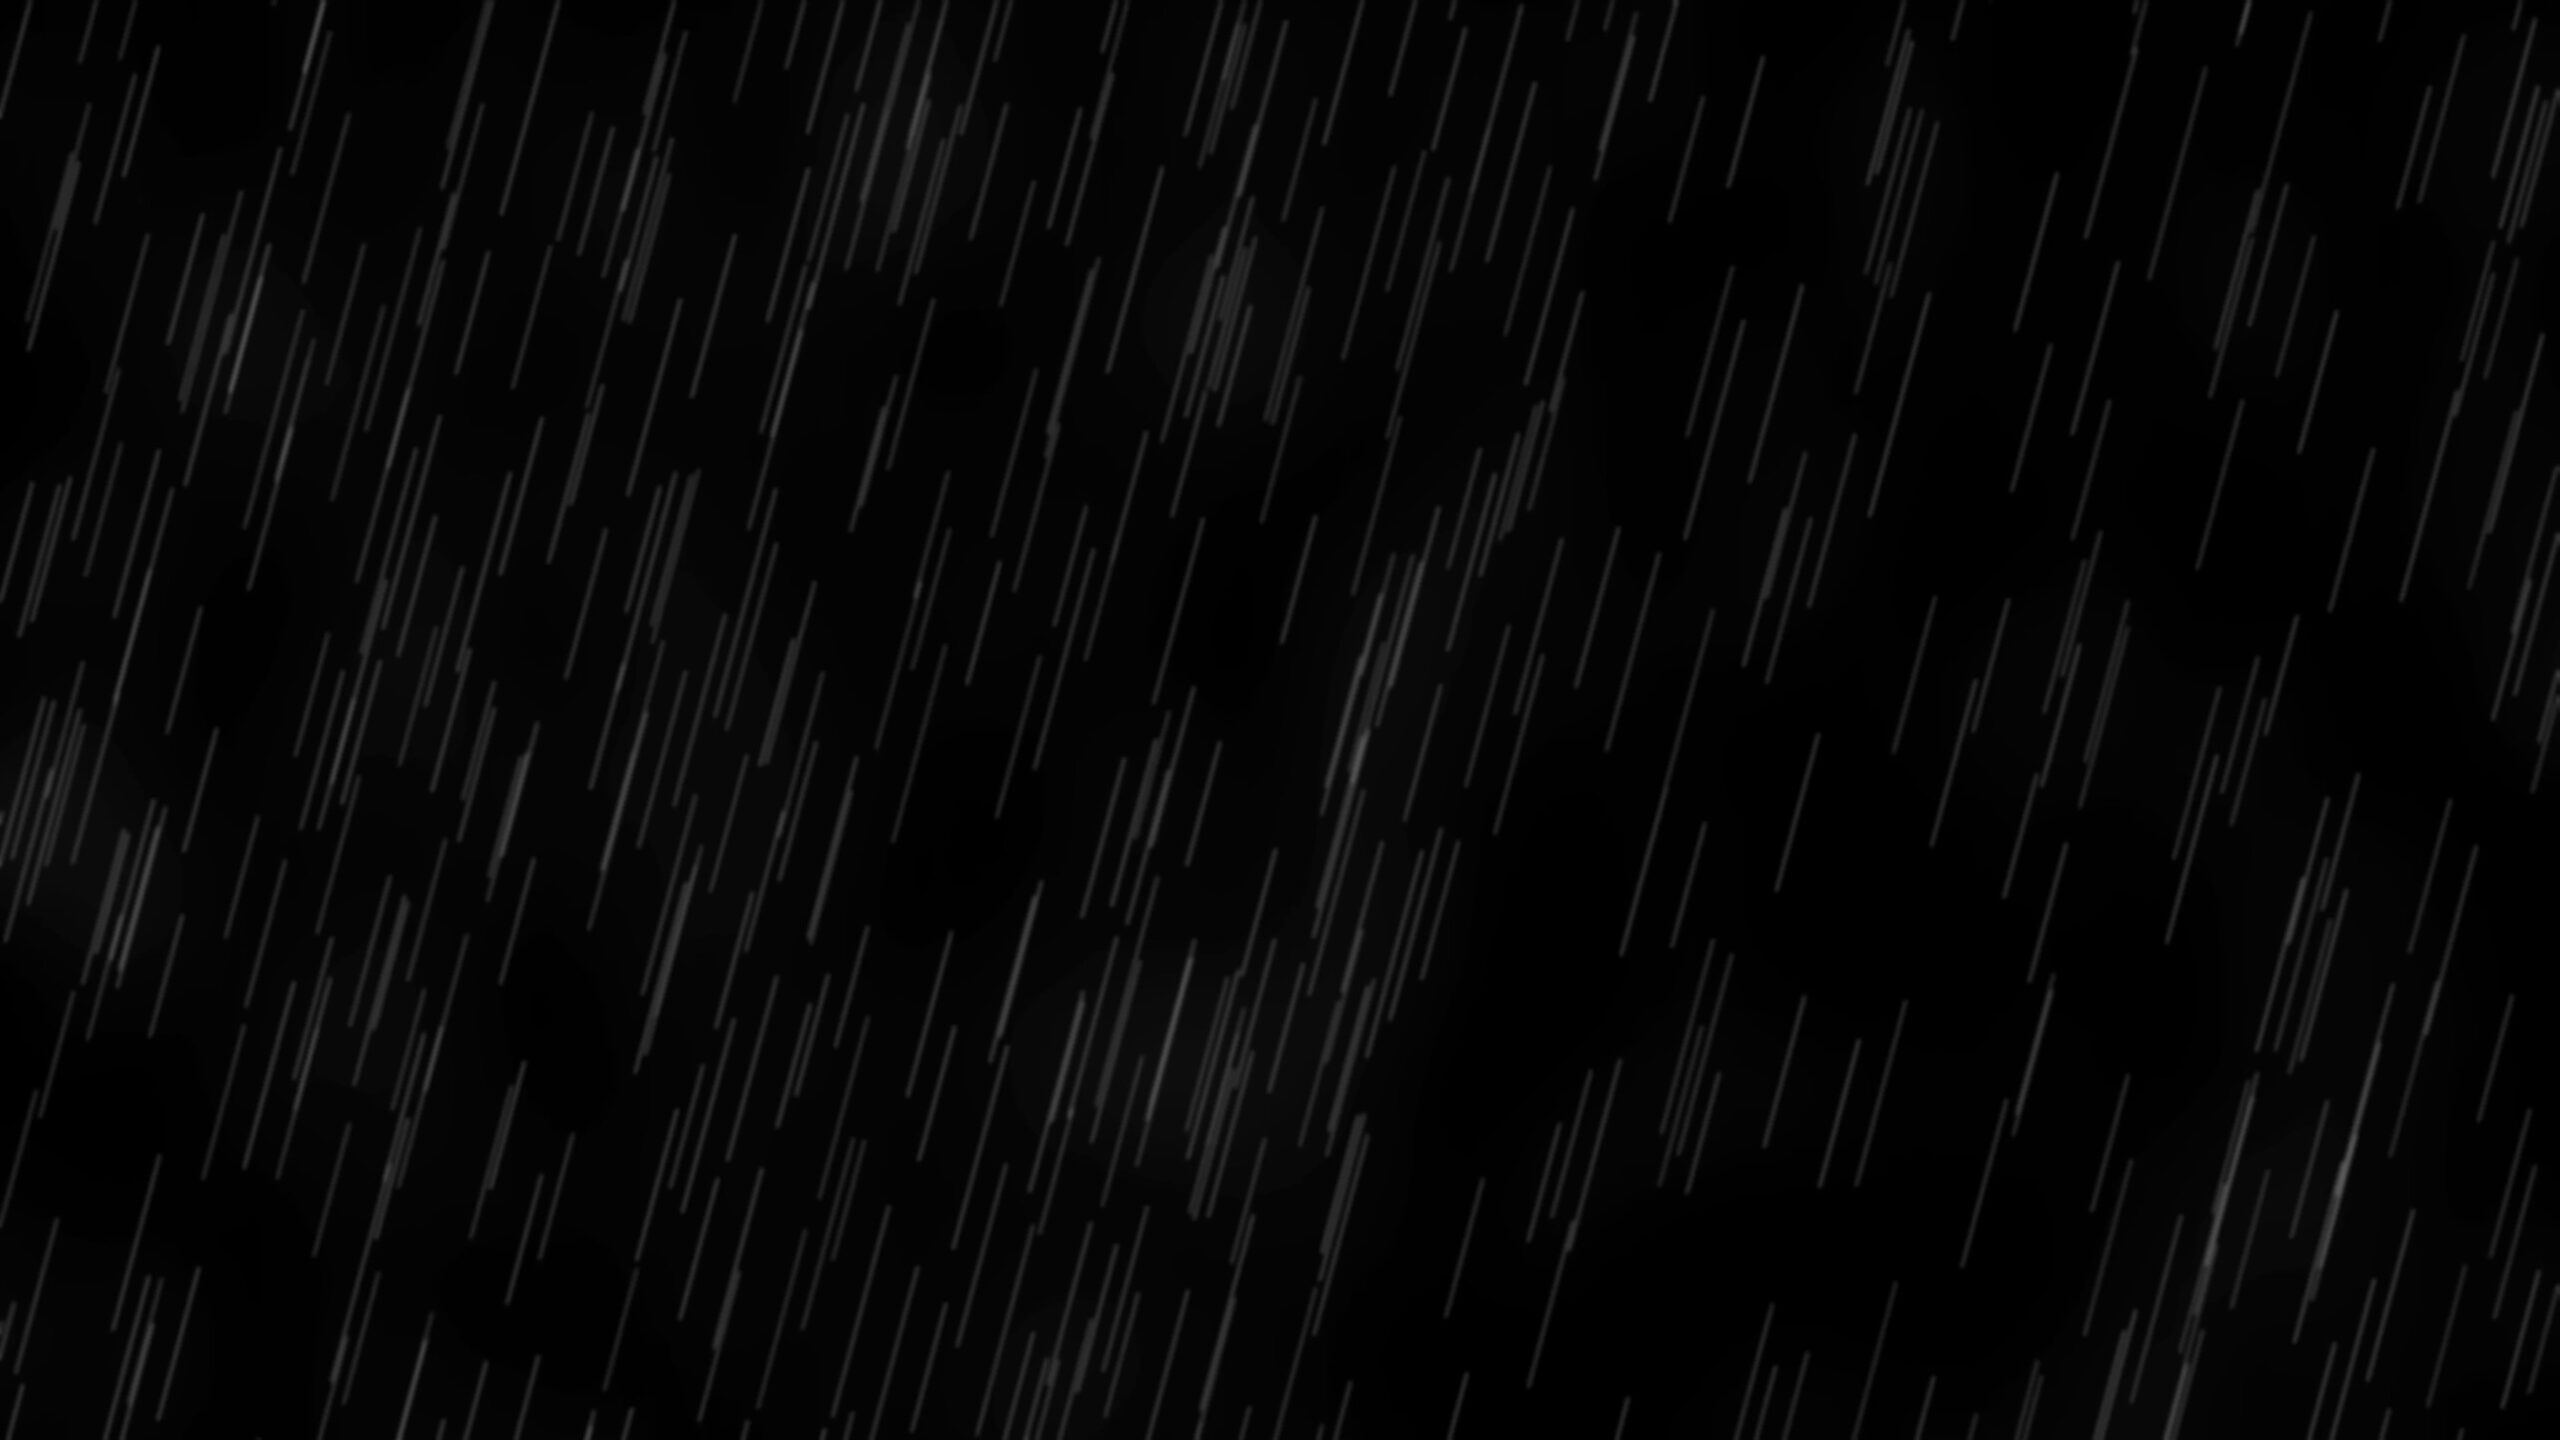 4K Rain Overlay Effect With Sound Free Download || Free Overlay Effect For Editing